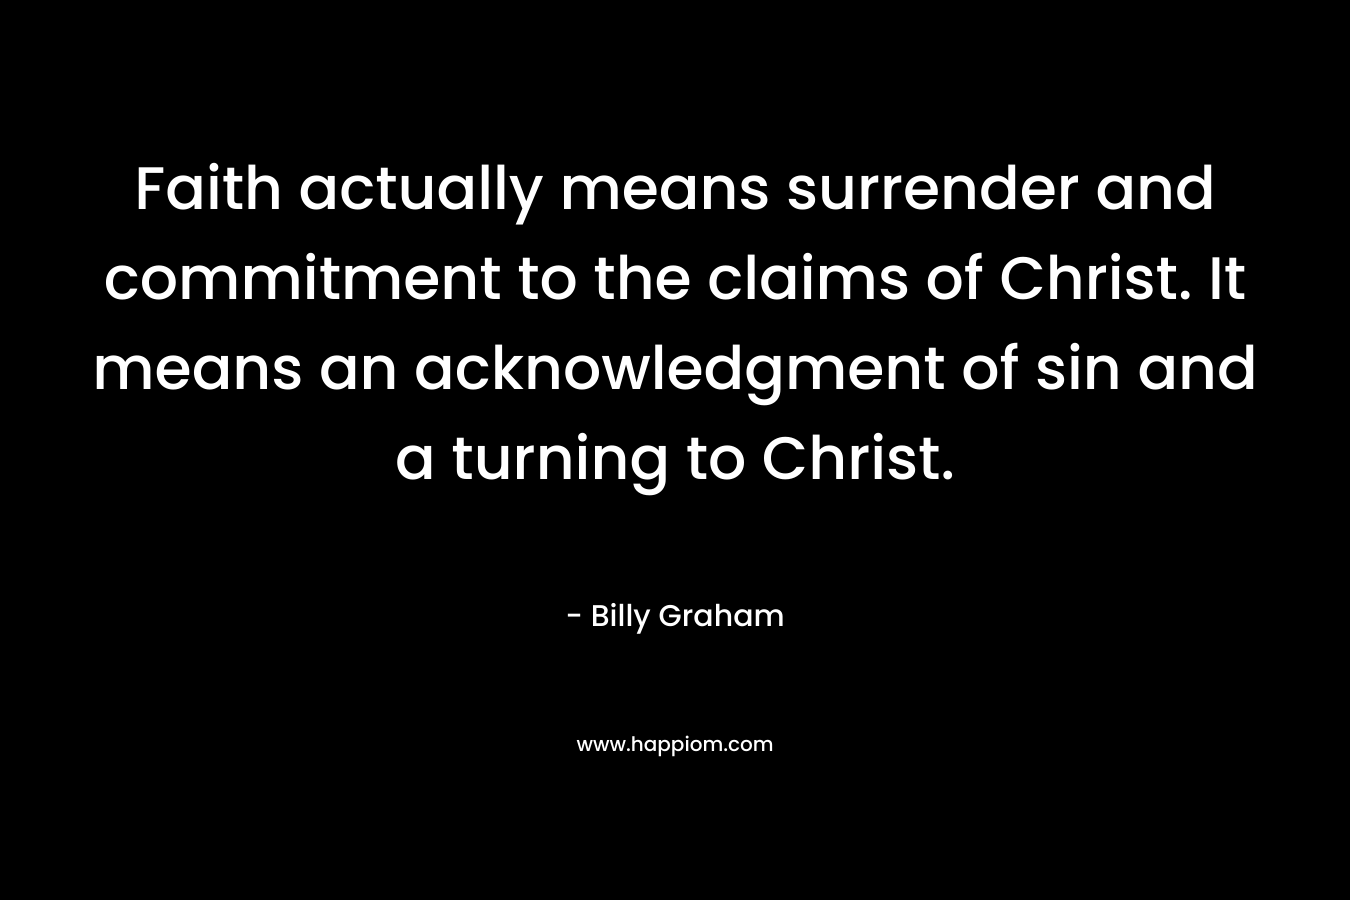 Faith actually means surrender and commitment to the claims of Christ. It means an acknowledgment of sin and a turning to Christ.